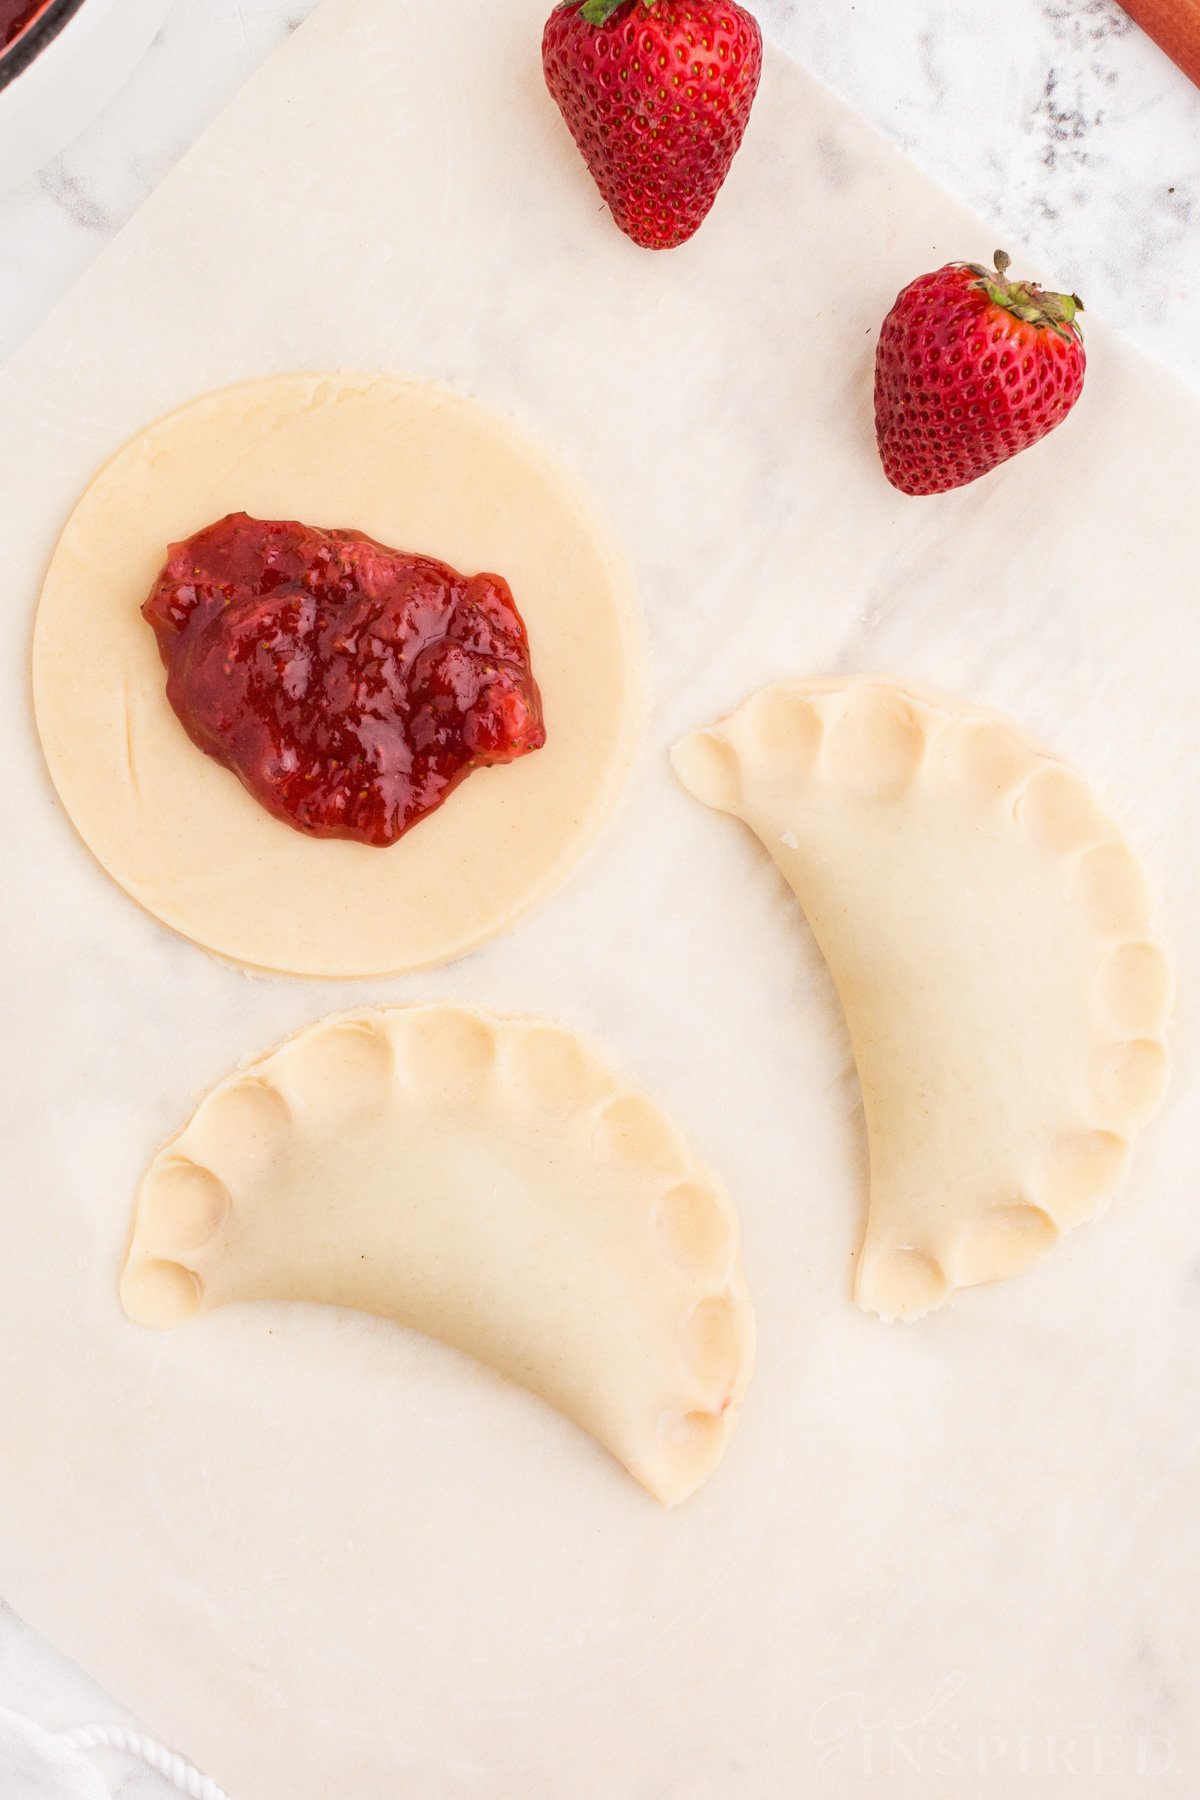 Several strawberry rhubarb hand pies, two are folded into half-moons and sealed along the edges.